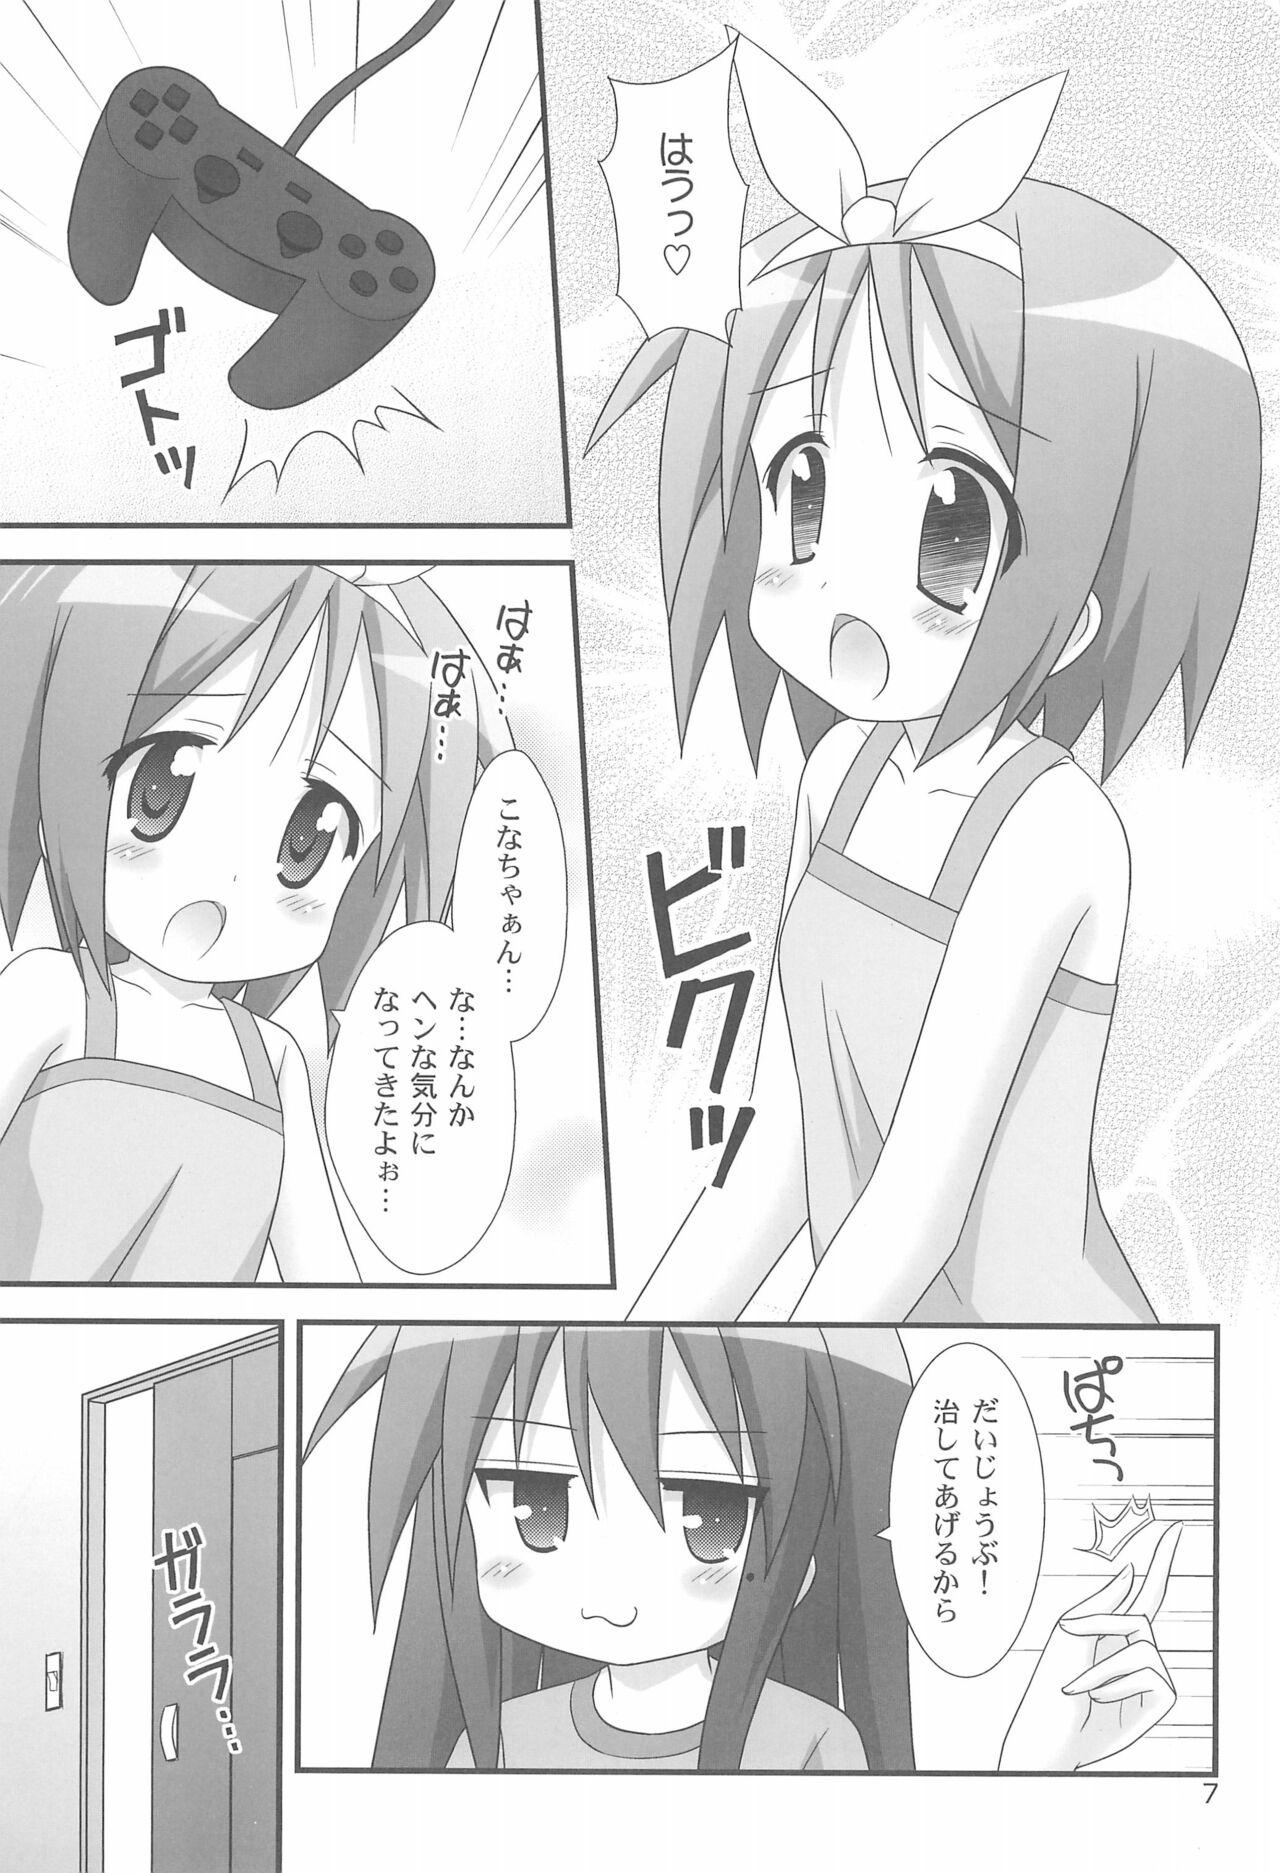 Chastity Love Choco - Lucky star Submission - Page 7